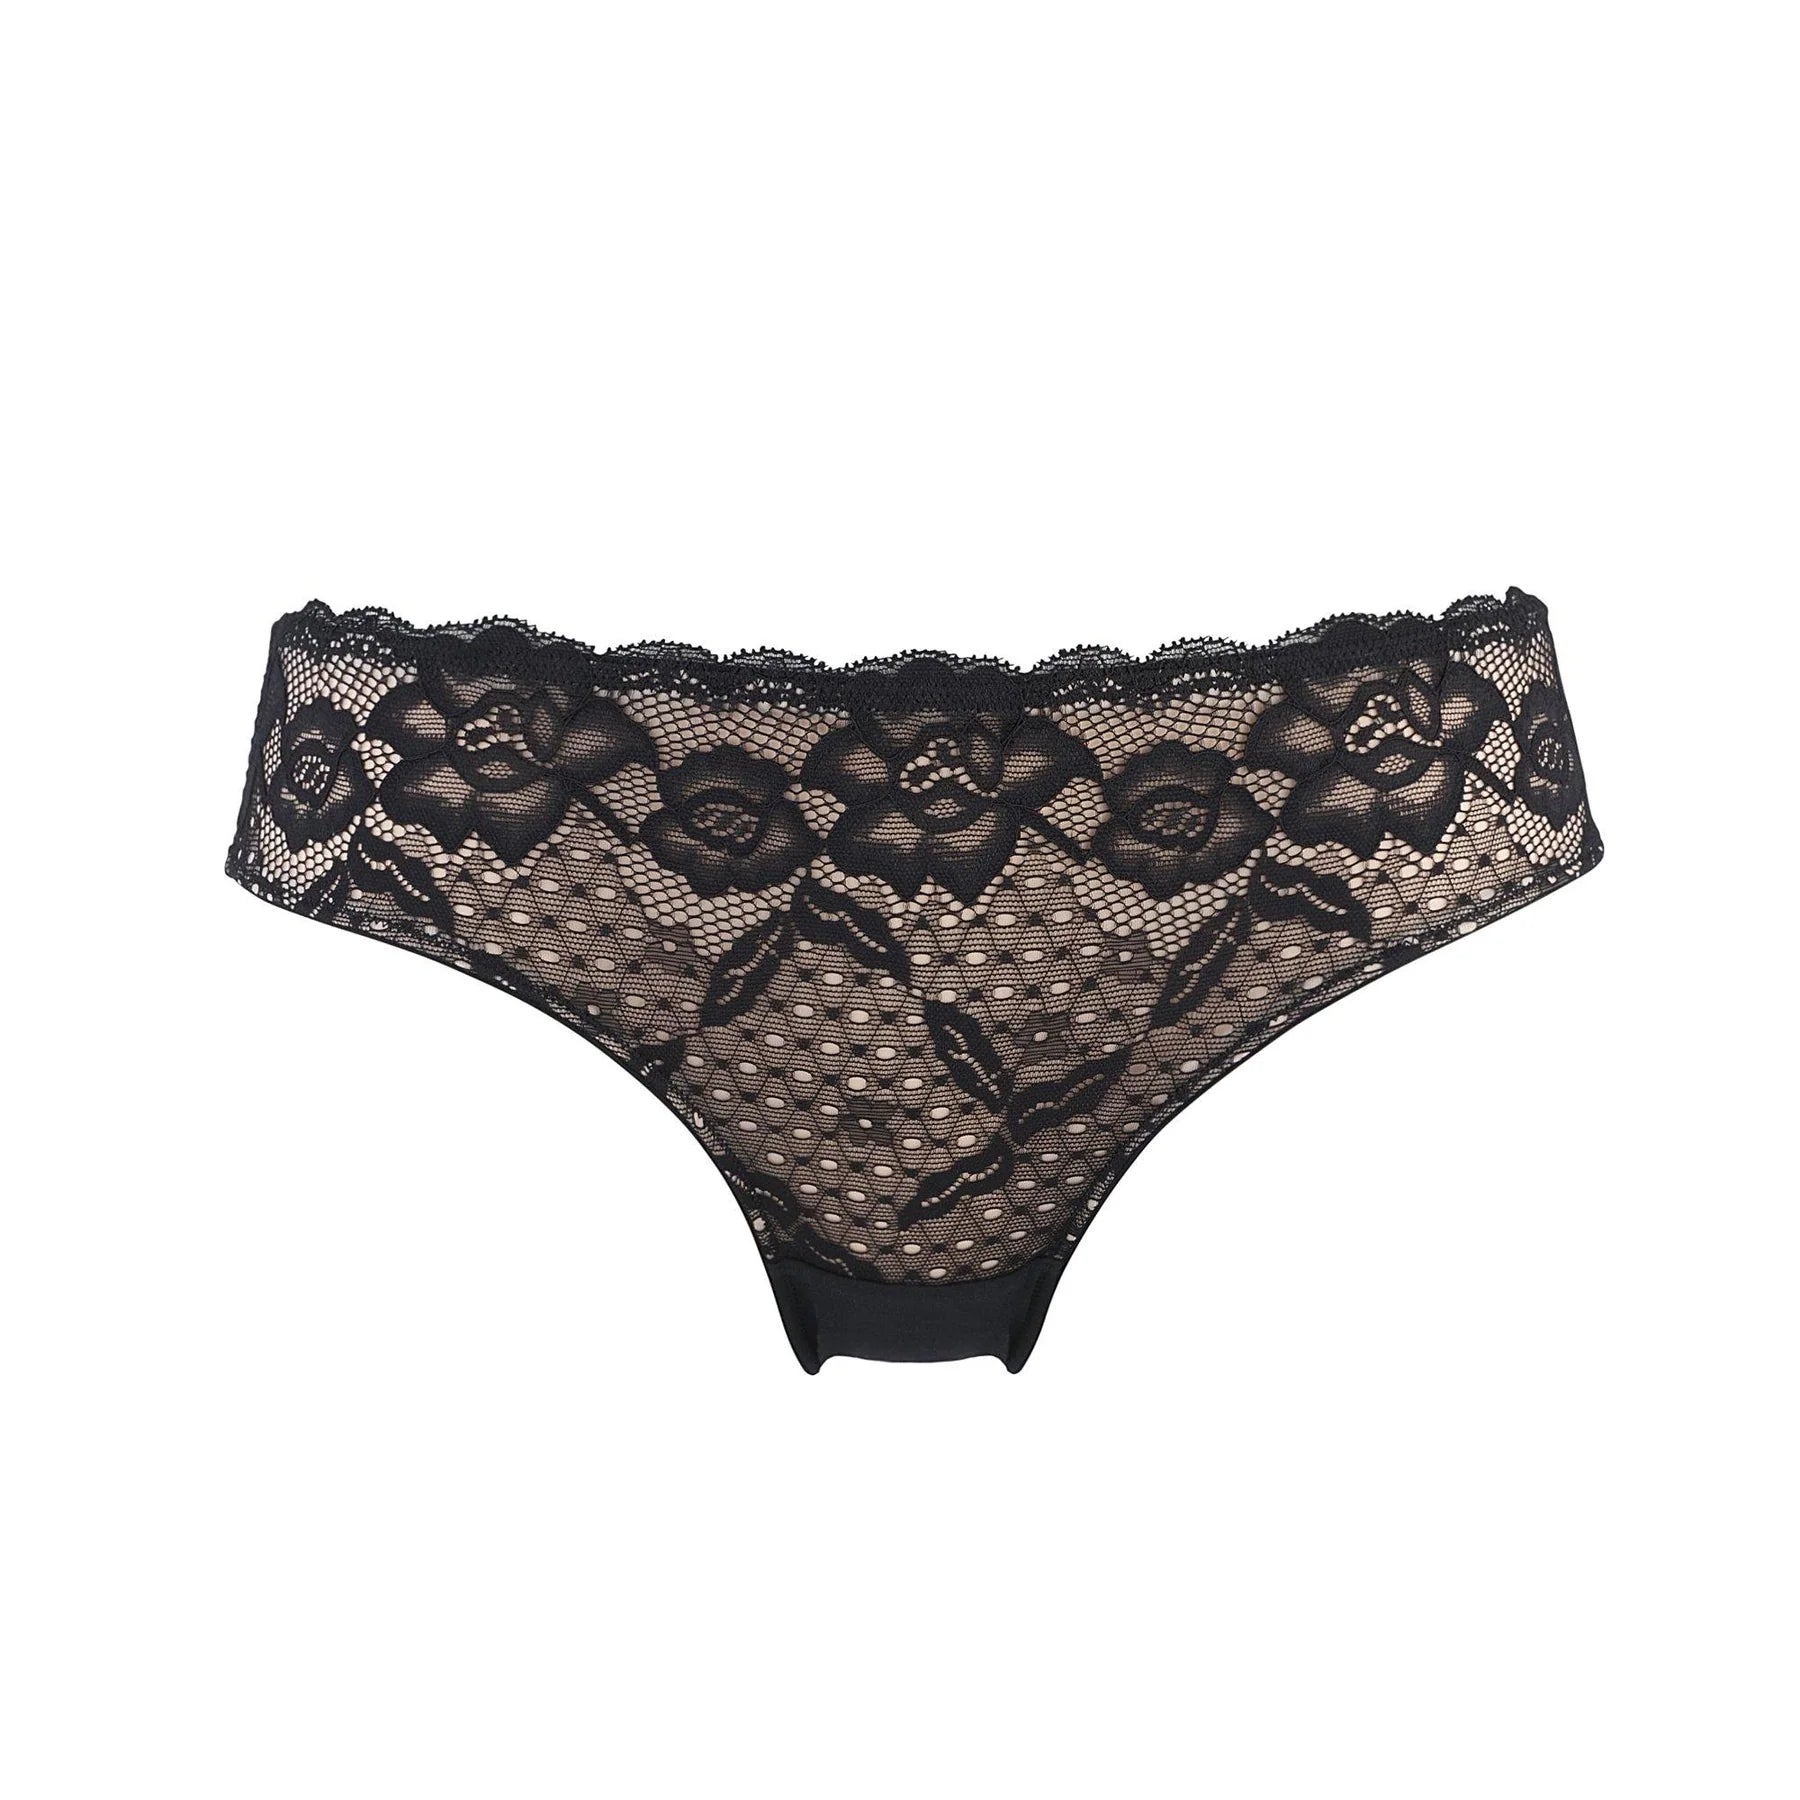 Buy Red/Green High Rise Lace Knickers 2 Pack from Next Luxembourg